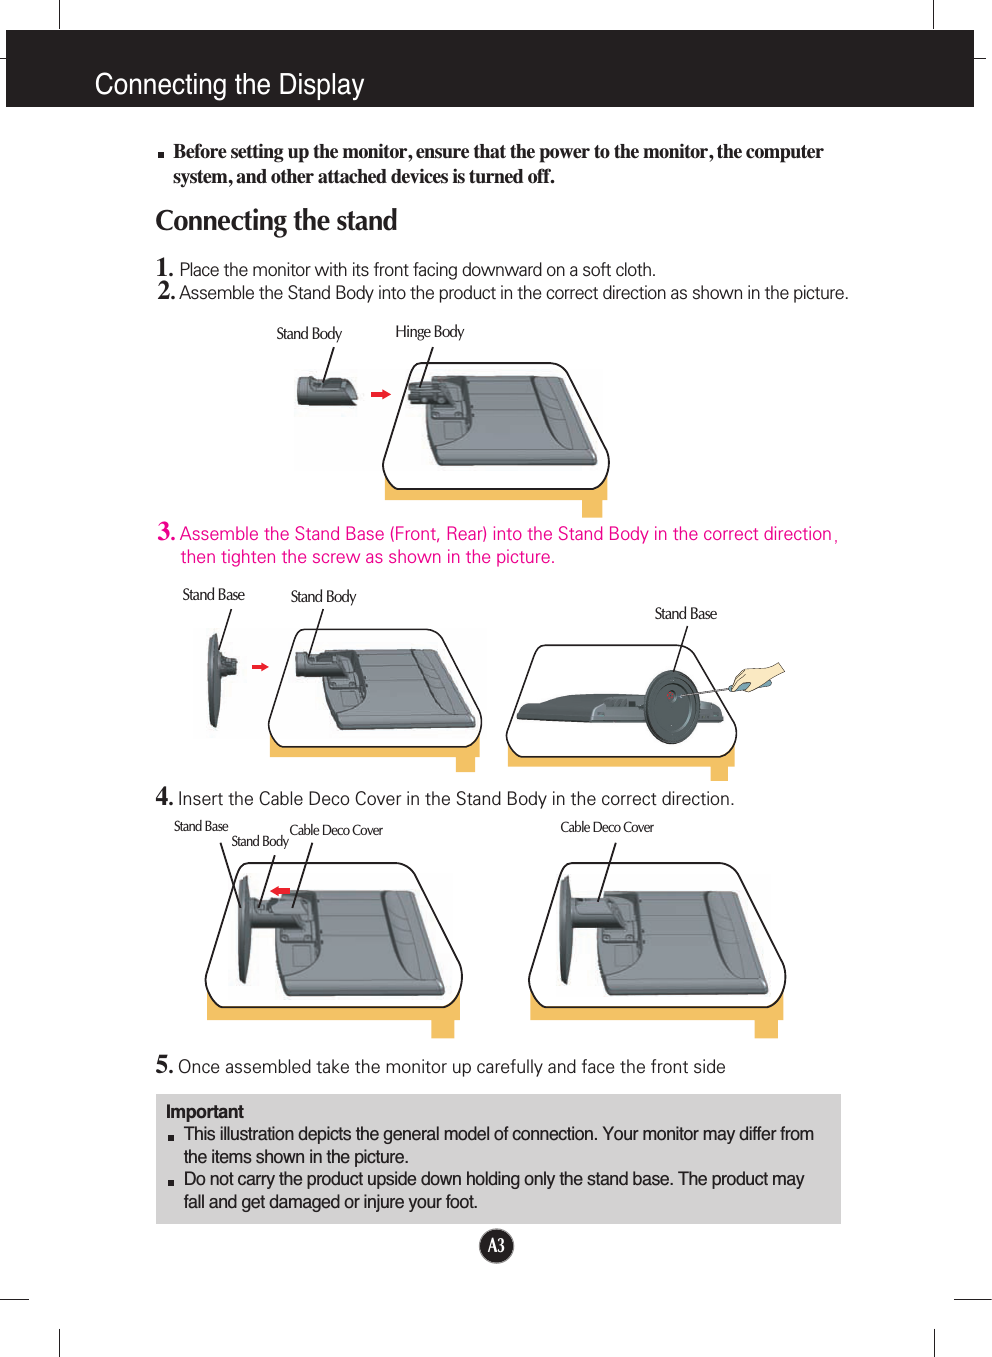 A3Connecting the DisplayImportantThis illustration depicts the general model of connection. Your monitor may differ fromthe items shown in the picture.Do not carry the product upside down holding only the stand base. The product mayfall and get damaged or injure your foot.Before setting up the monitor, ensure that the power to the monitor, the computersystem, and other attached devices is turned off.Connecting the stand 1.Place the monitor with its front facing downward on a soft cloth.2.Assemble the Stand Body into the product in the correct direction as shown in the picture. 3.Assemble the Stand Base (Front, Rear) into the Stand Body in the correct directionthen tighten the screw as shown in the picture.Stand BodyStand BaseStand Body Hinge Body5.Once assembled take the monitor up carefully and face the front side4.Insert the Cable Deco Cover in the Stand Body in the correct direction.Stand BodyStand Base Cable Deco Cover Cable Deco CoverStand Base